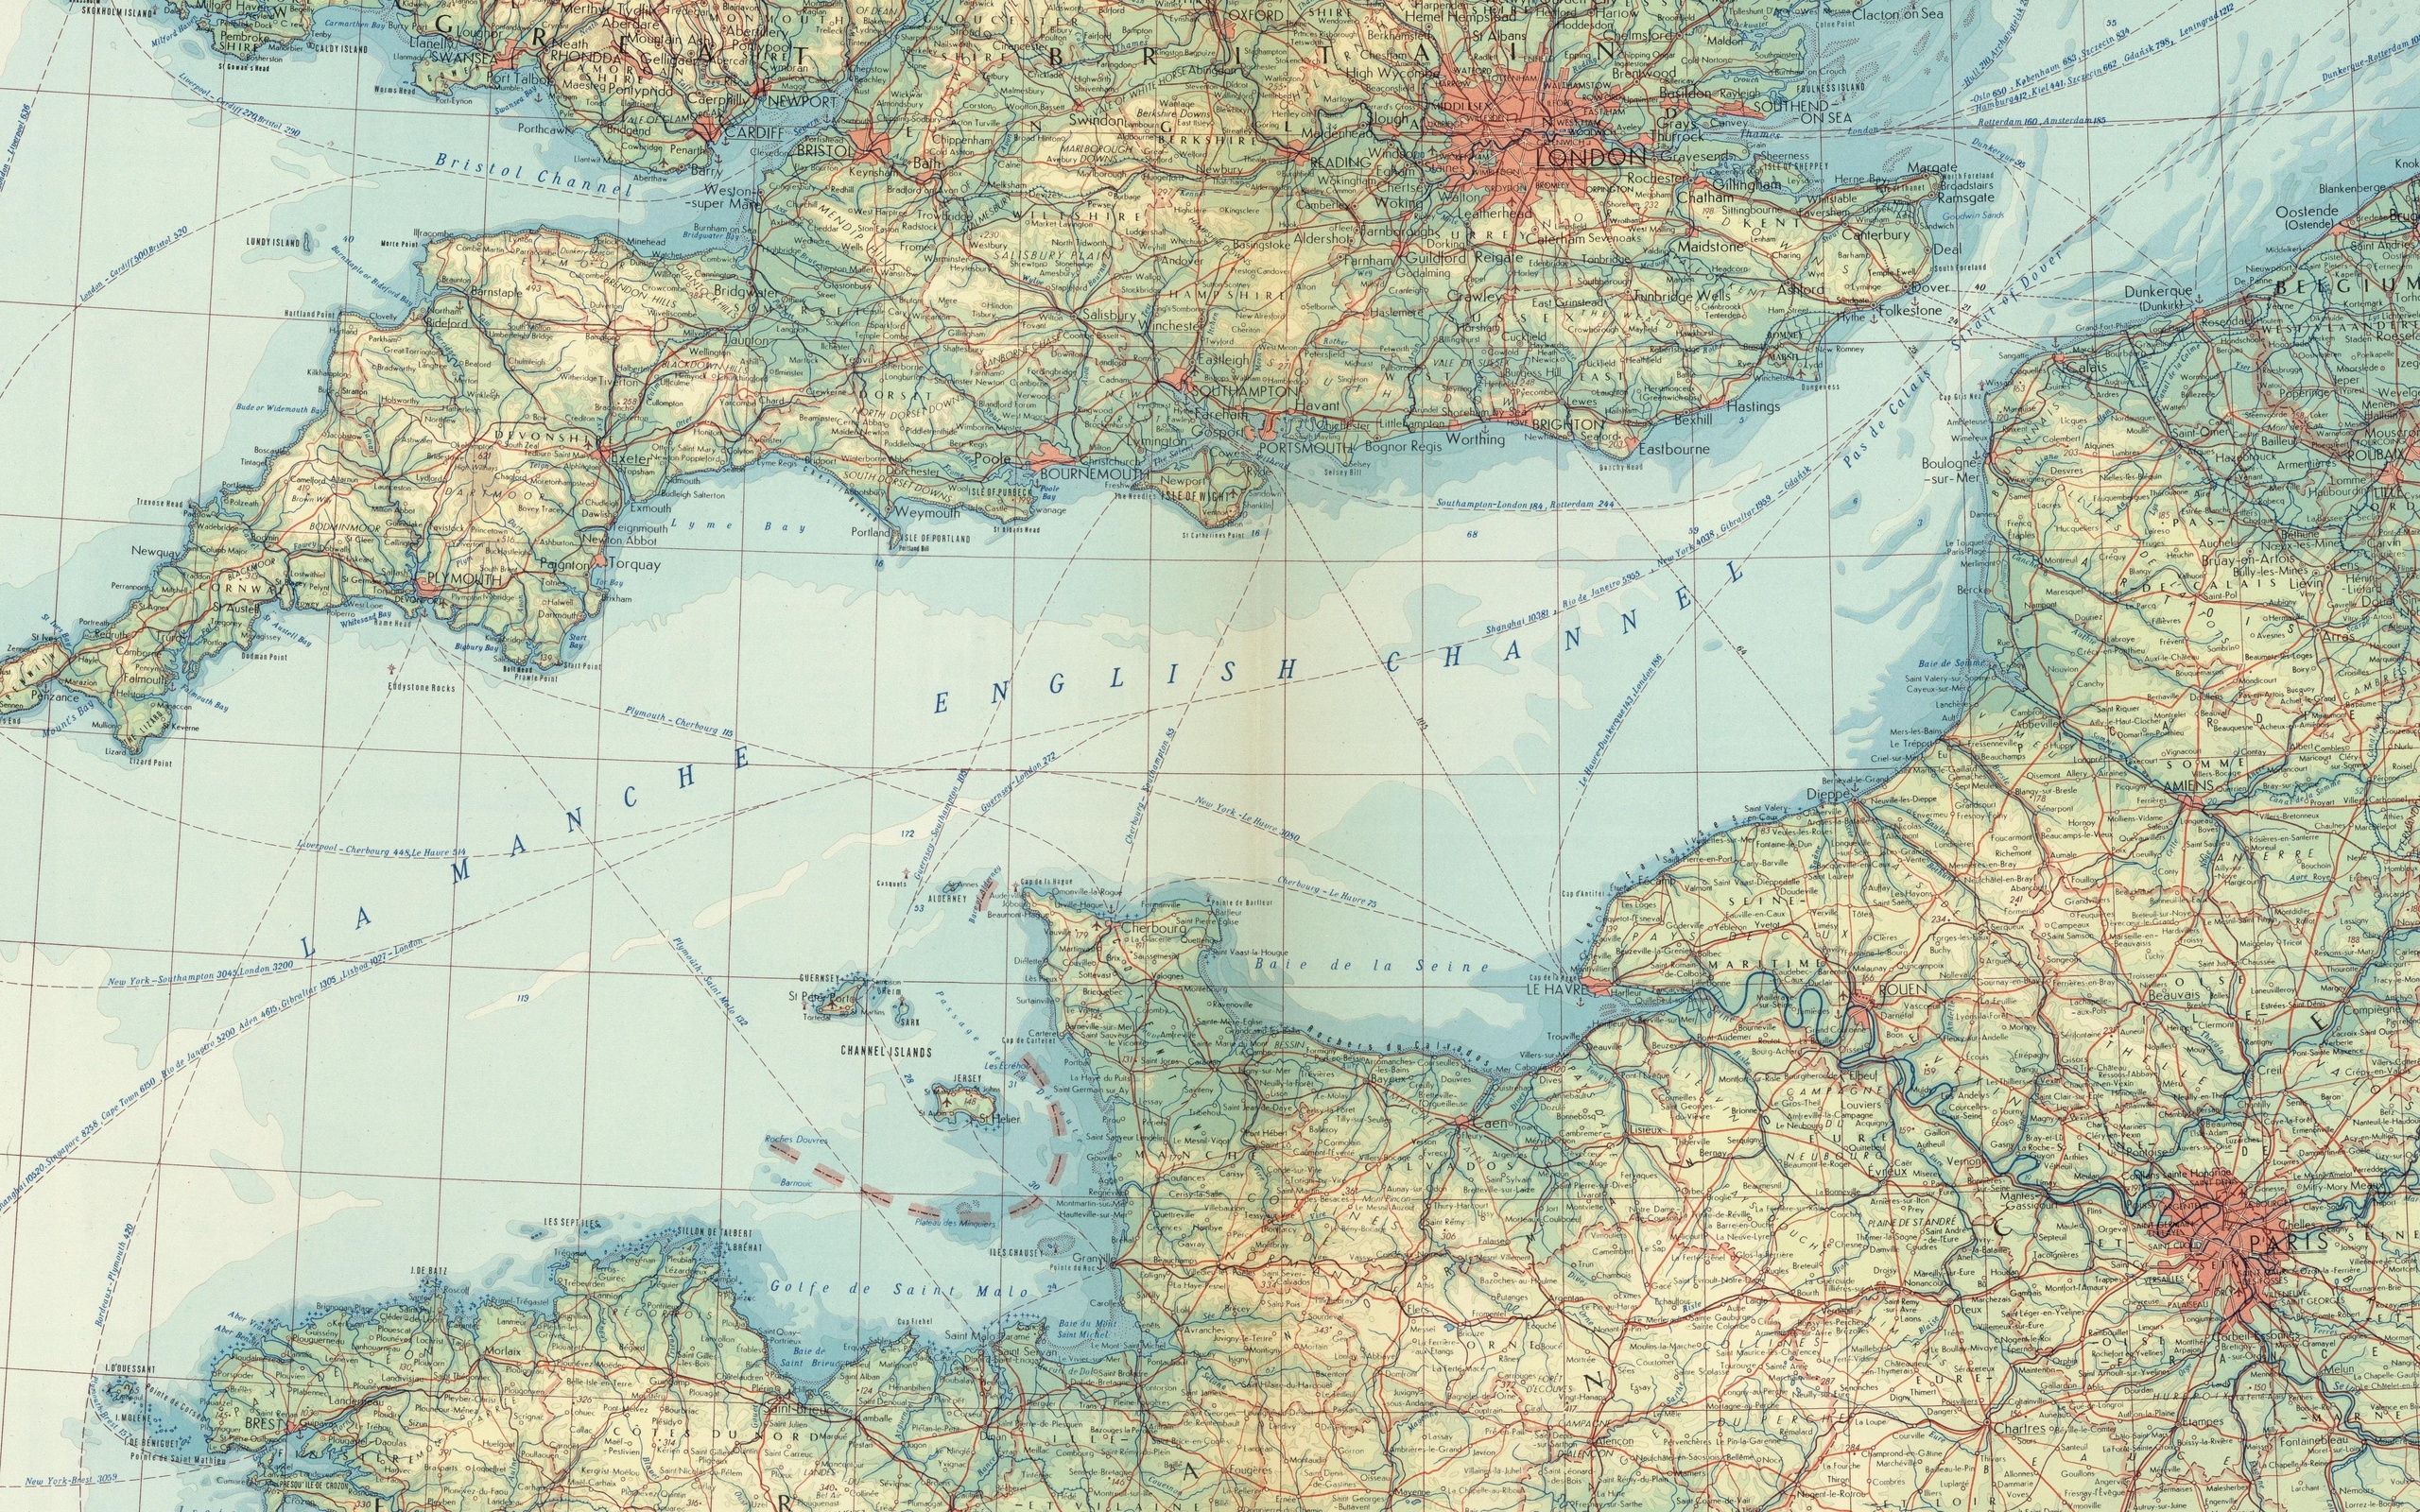 world atlas, 1968, map of the english channel